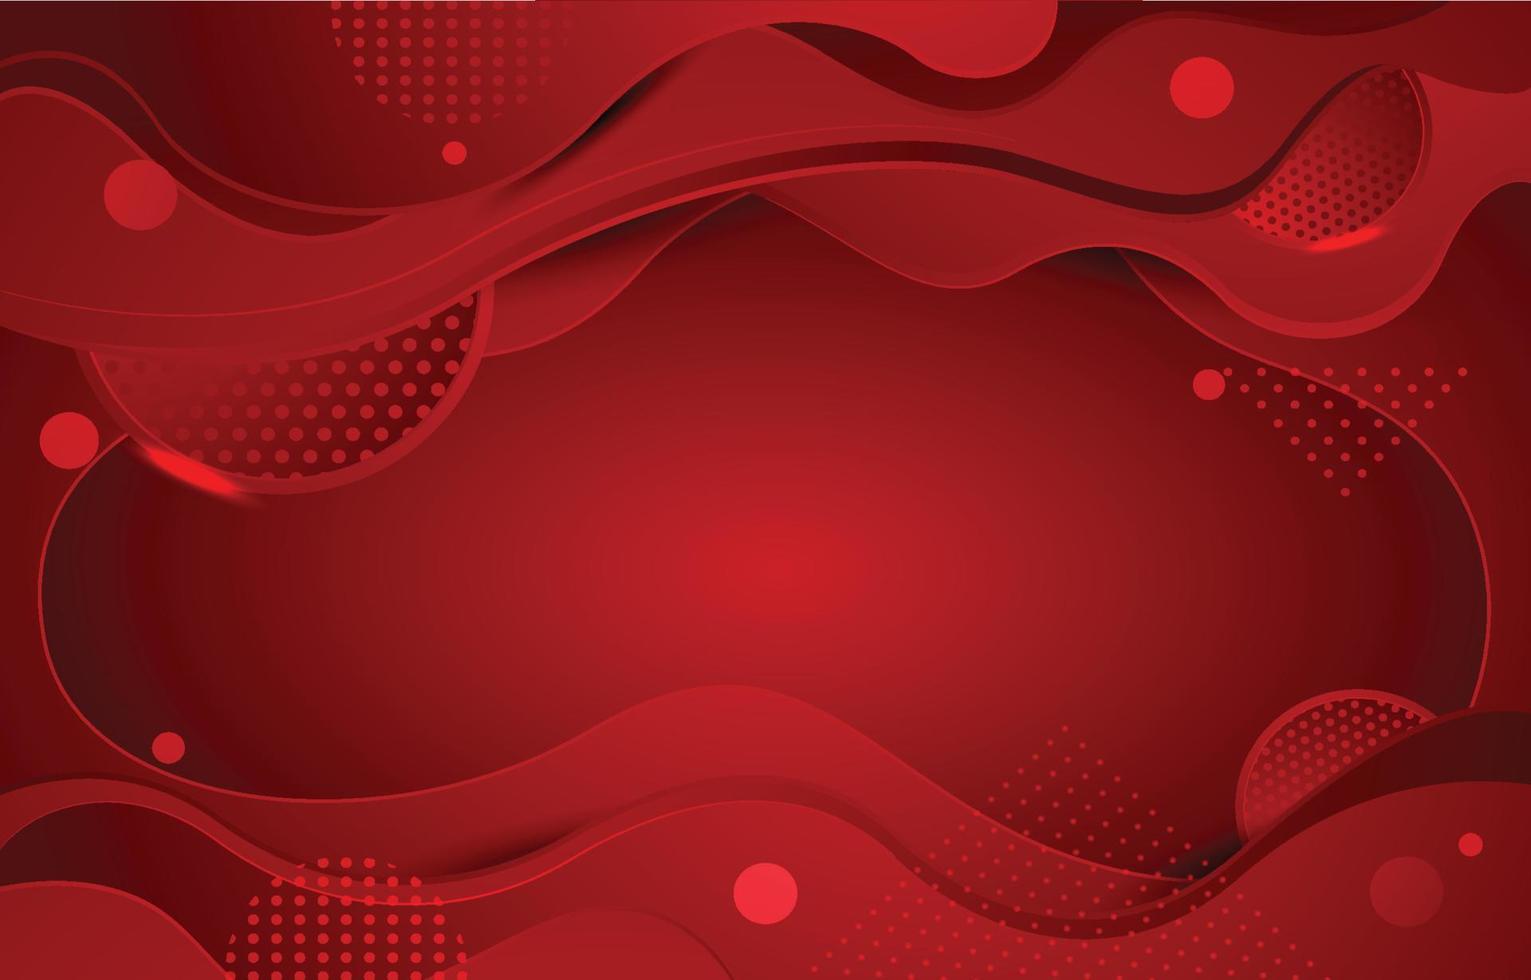 Red Background Effect vector